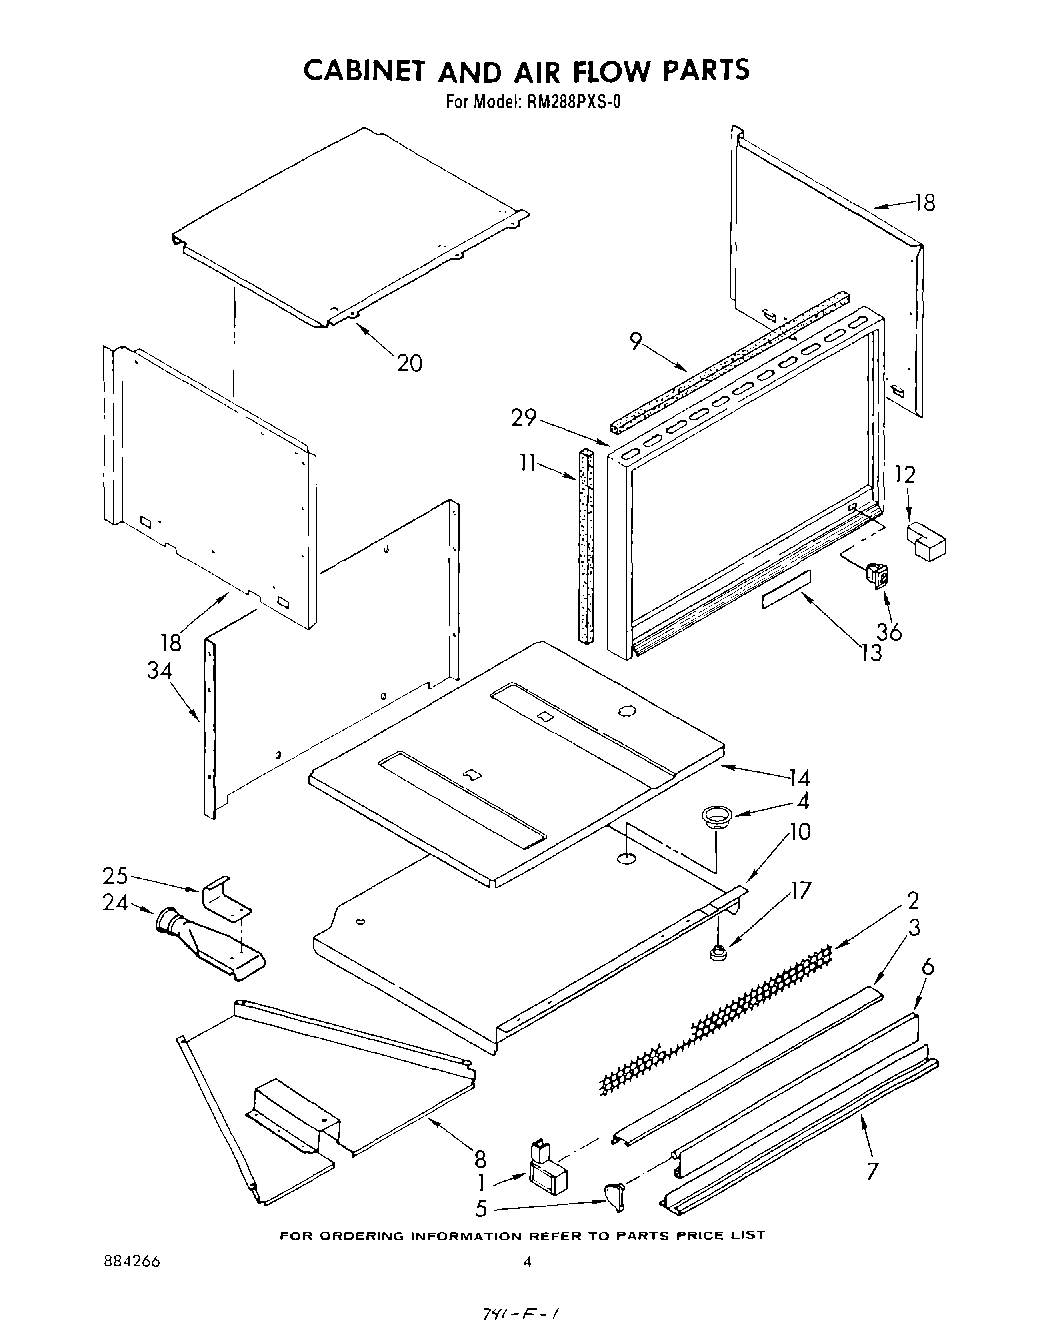 03 - CABINET AND AIRFLOW